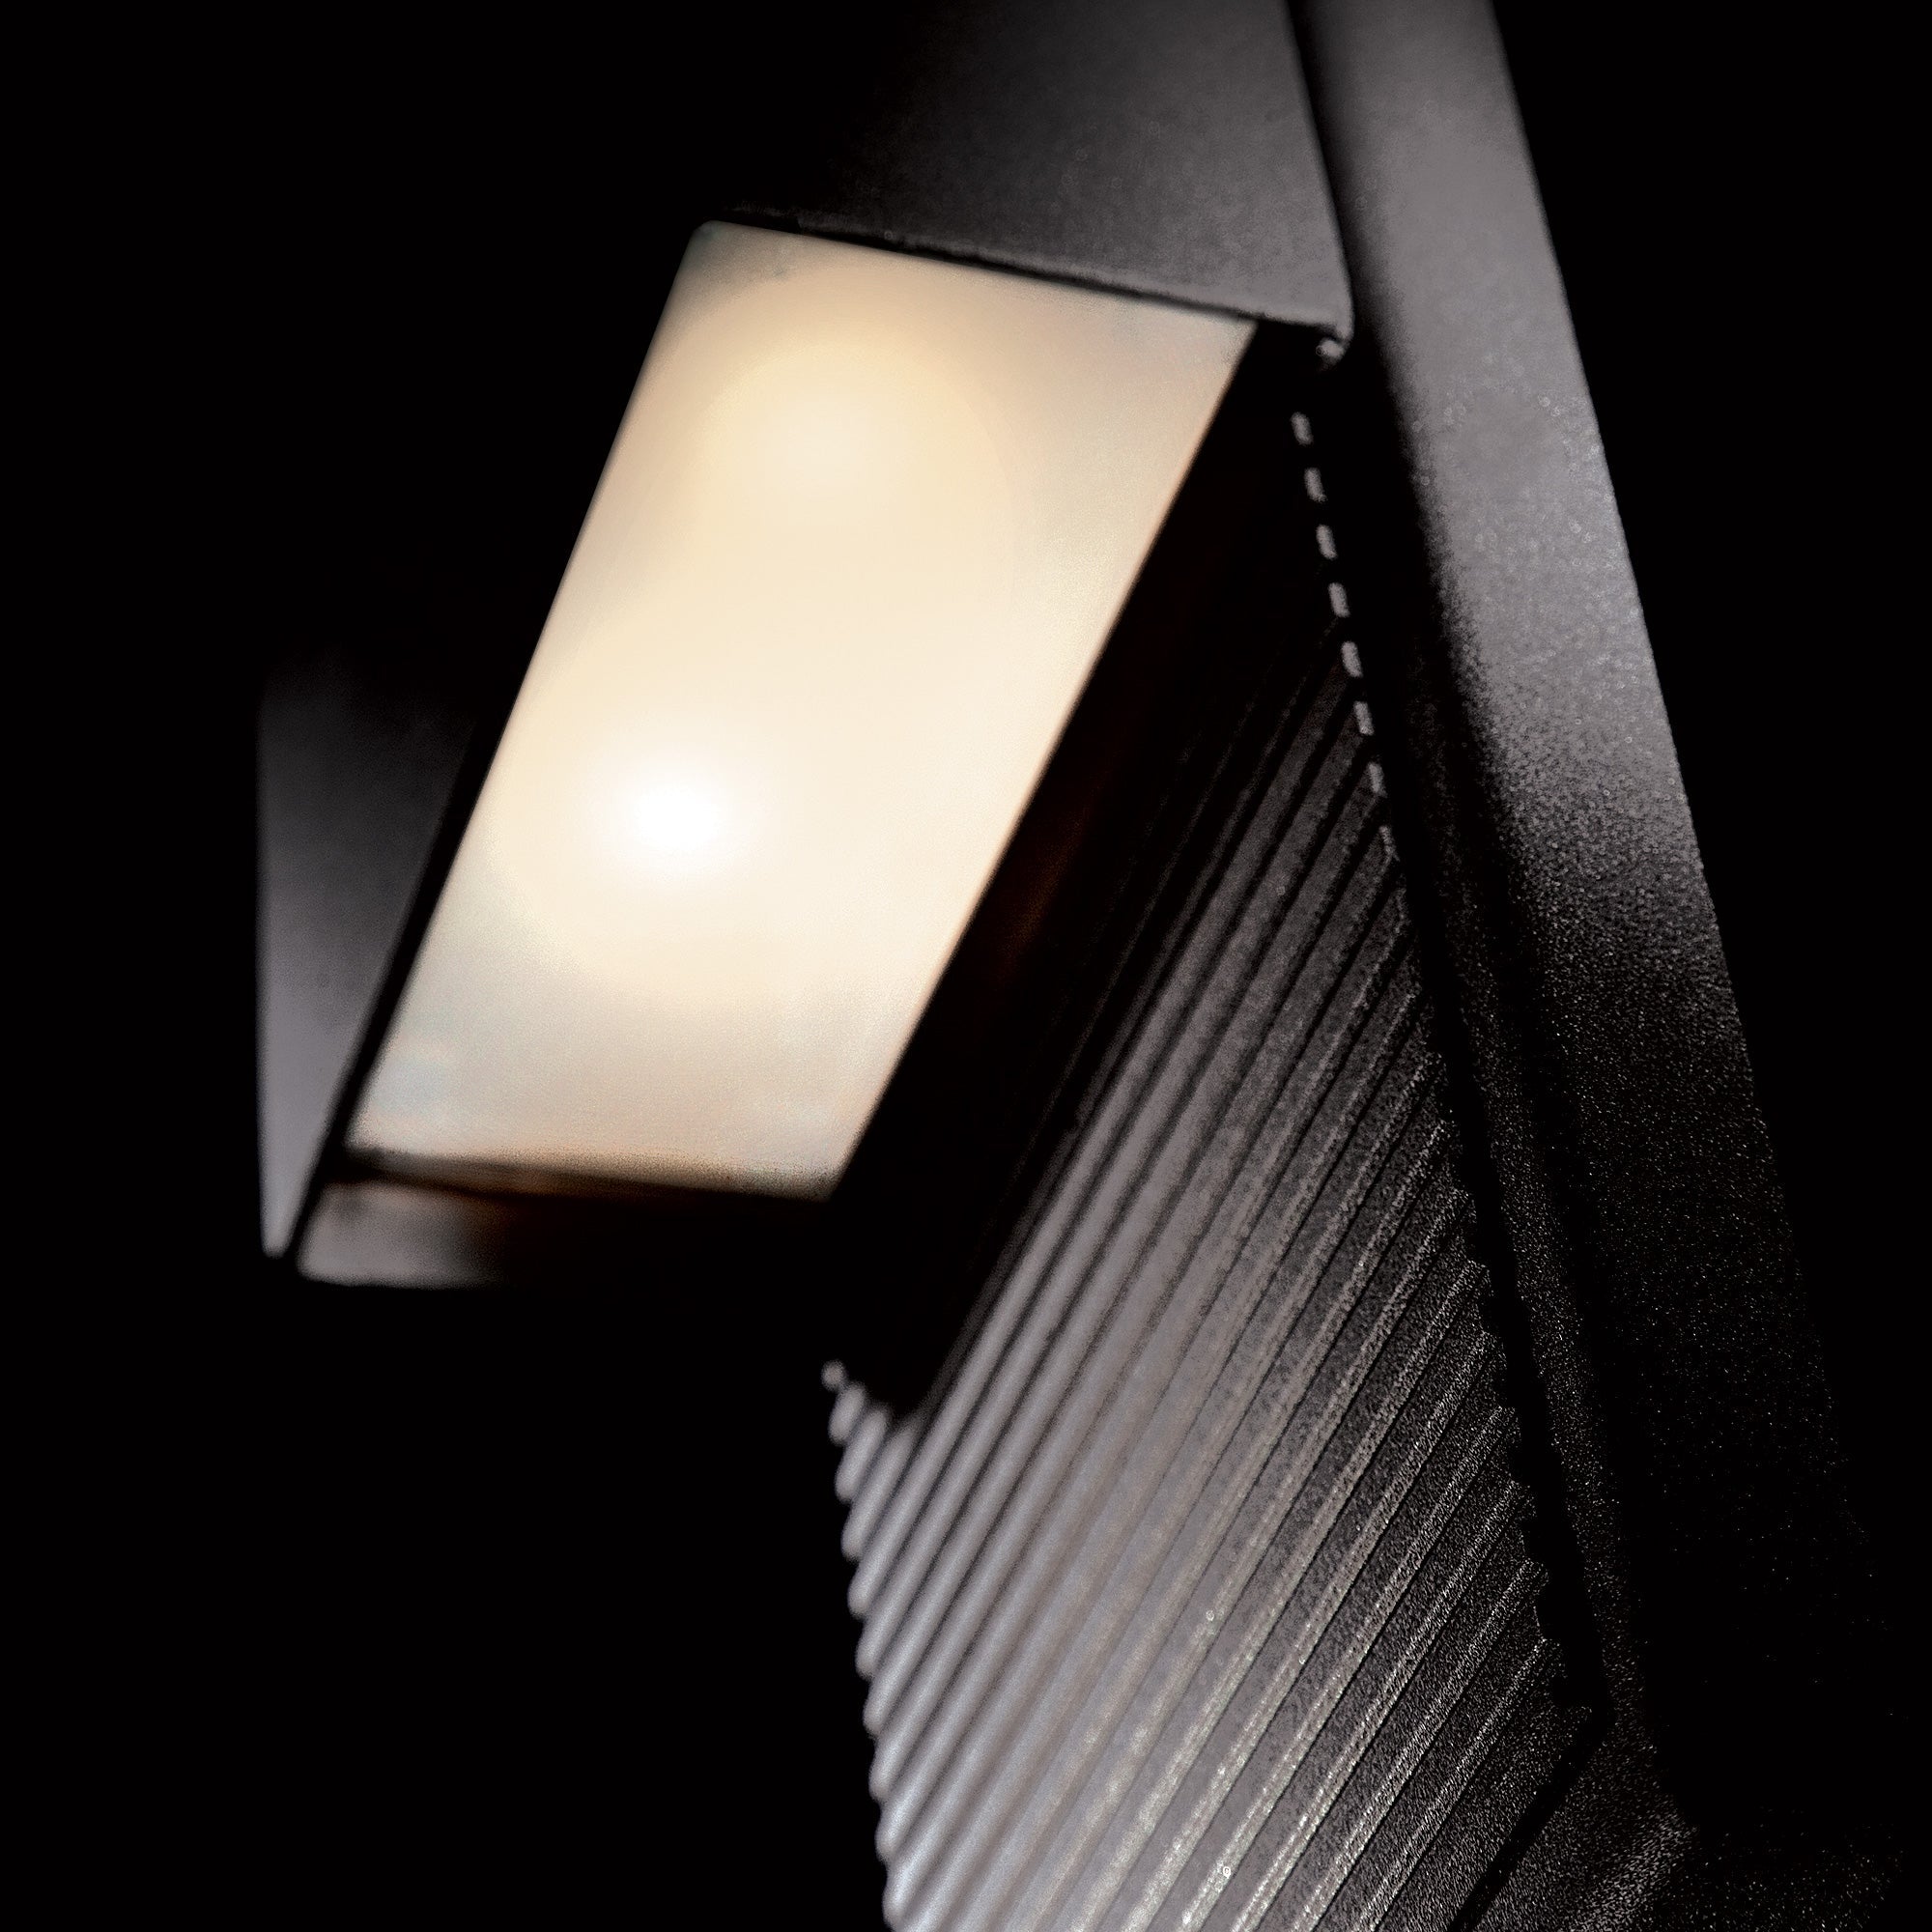 Hiline 8" LED Indoor/Outdoor Wall Light